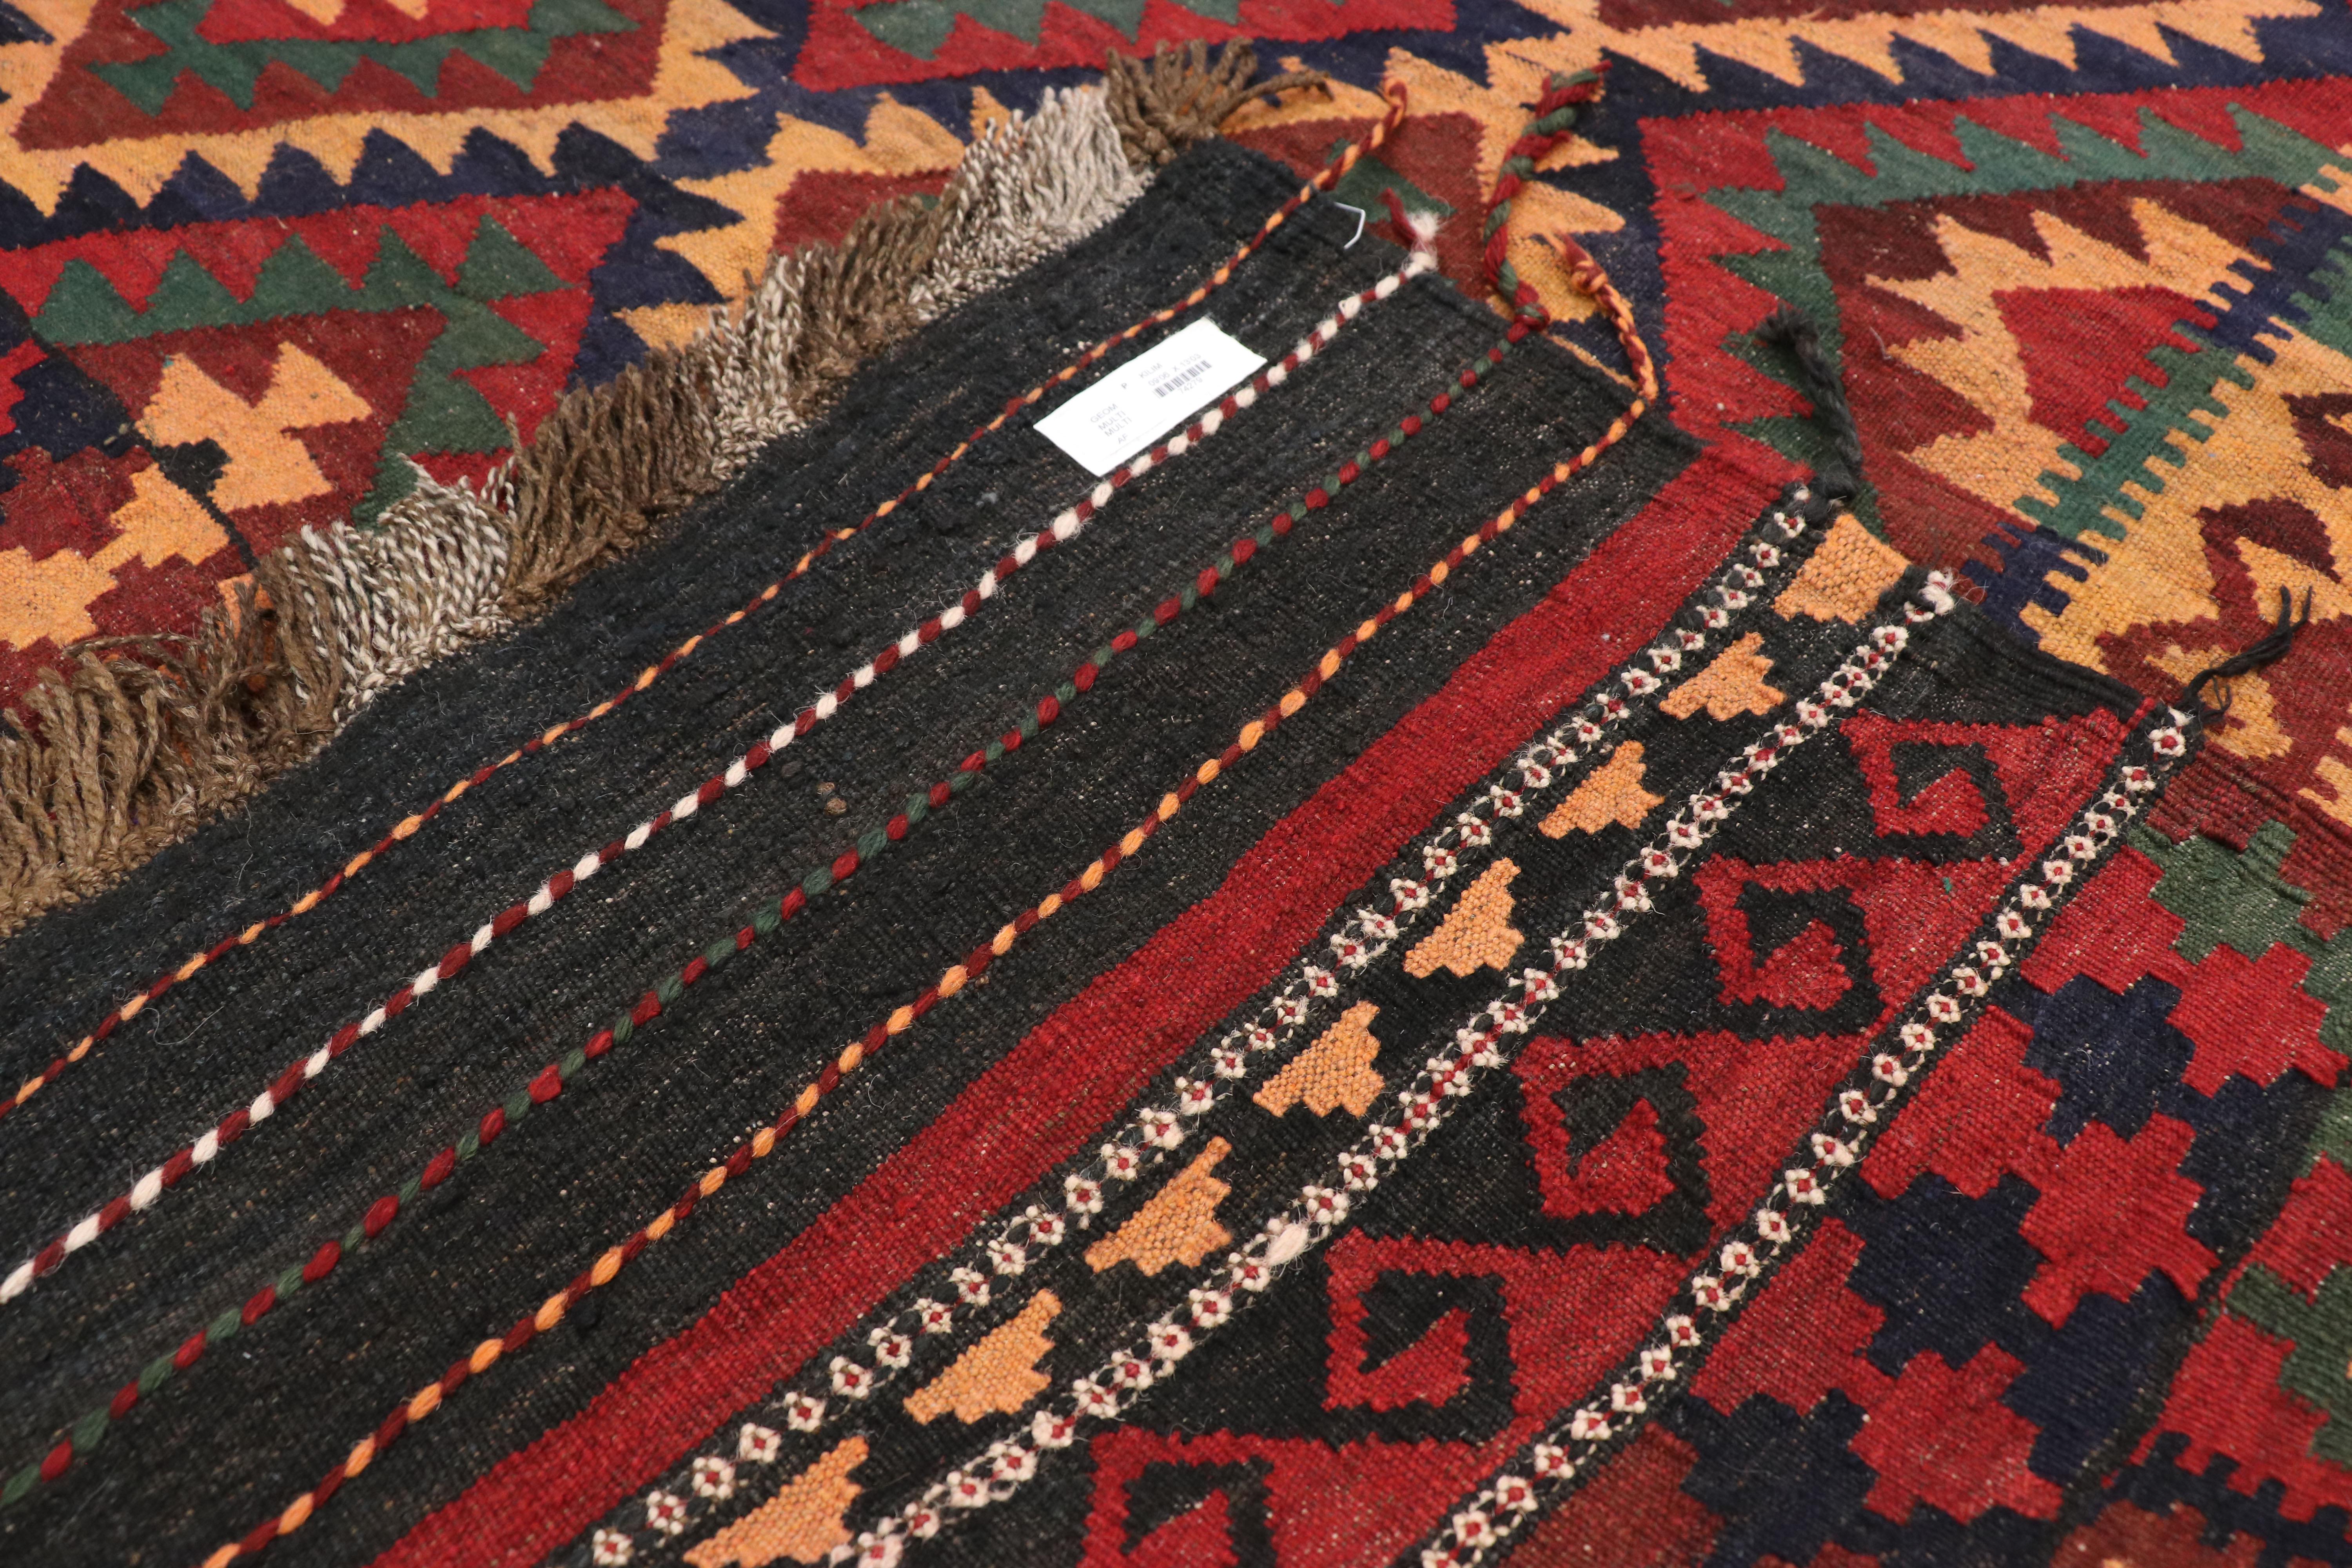 Vintage Afghan Ghalmouri Maimana Kilim Rug with Nomadic Tribal Style In Good Condition For Sale In Dallas, TX